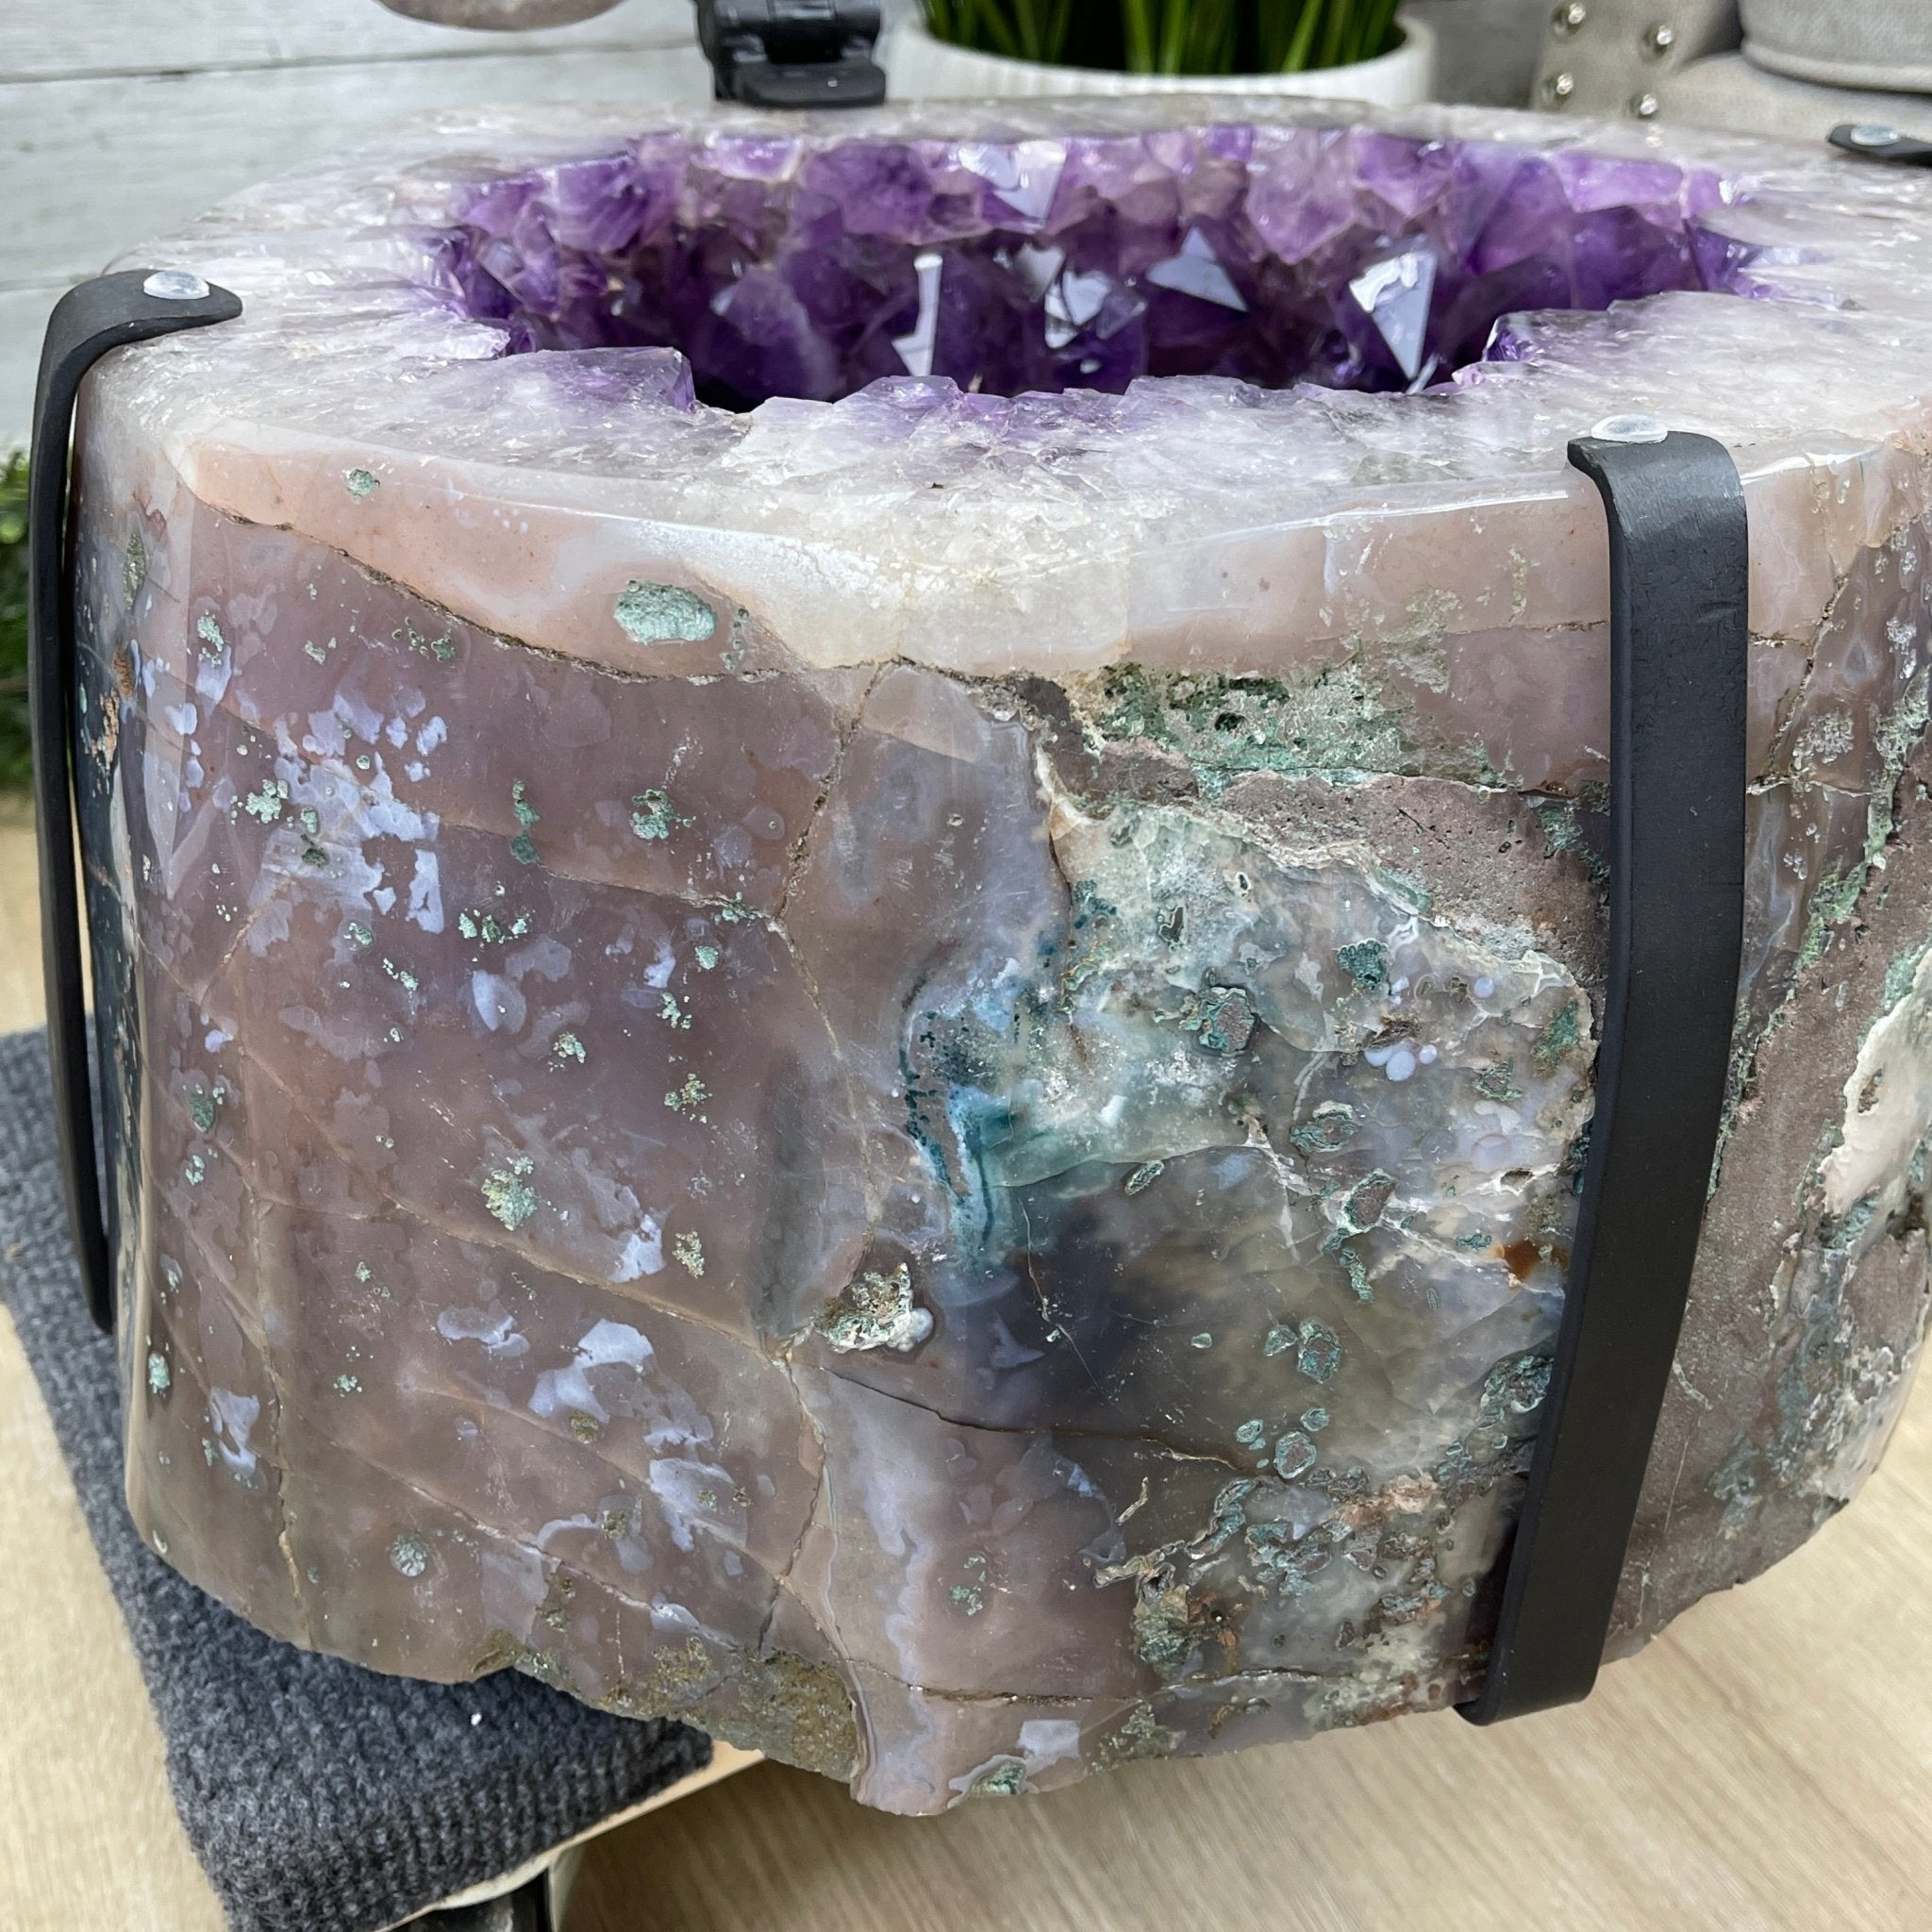 Super Quality Polished Amethyst "Jewelry Box", Clam Shell style Lid, 187.4 lbs & 24" tall, Model #5656-0007 by Brazil Gems - Brazil GemsBrazil GemsSuper Quality Polished Amethyst "Jewelry Box", Clam Shell style Lid, 187.4 lbs & 24" tall, Model #5656-0007 by Brazil GemsGeode Jewelry Boxes5656-0007